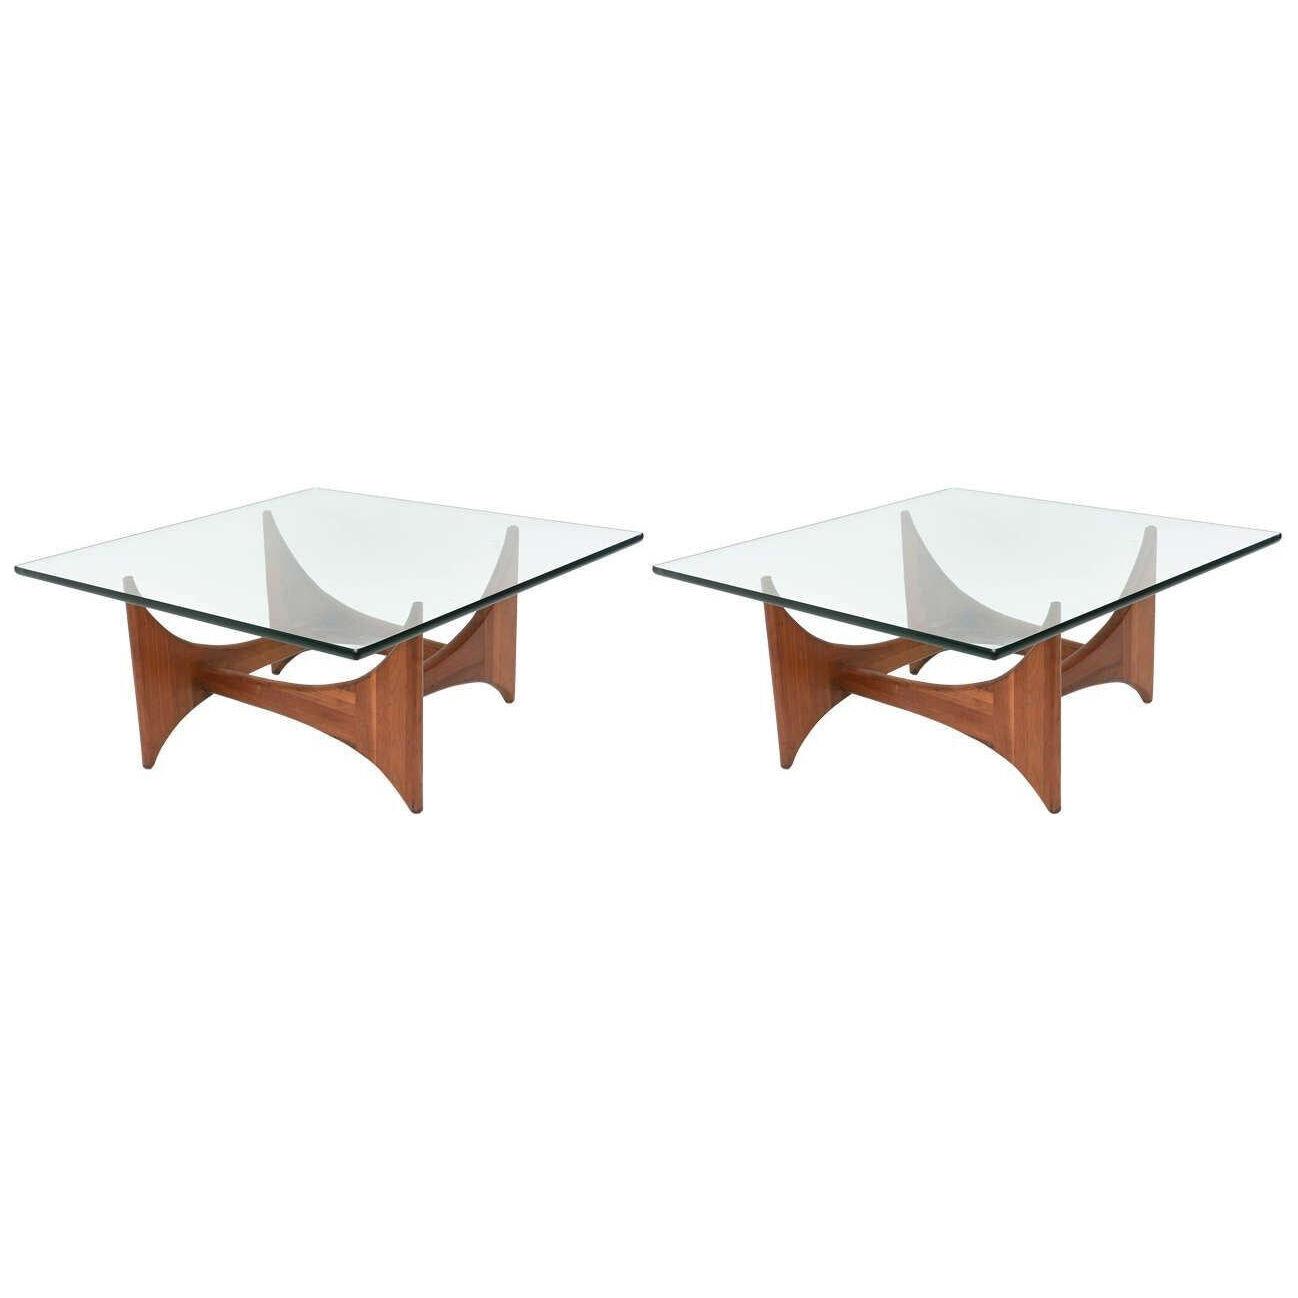 American Modern Pair of Walnut and Glass Low Tables by Adrian Pearsall